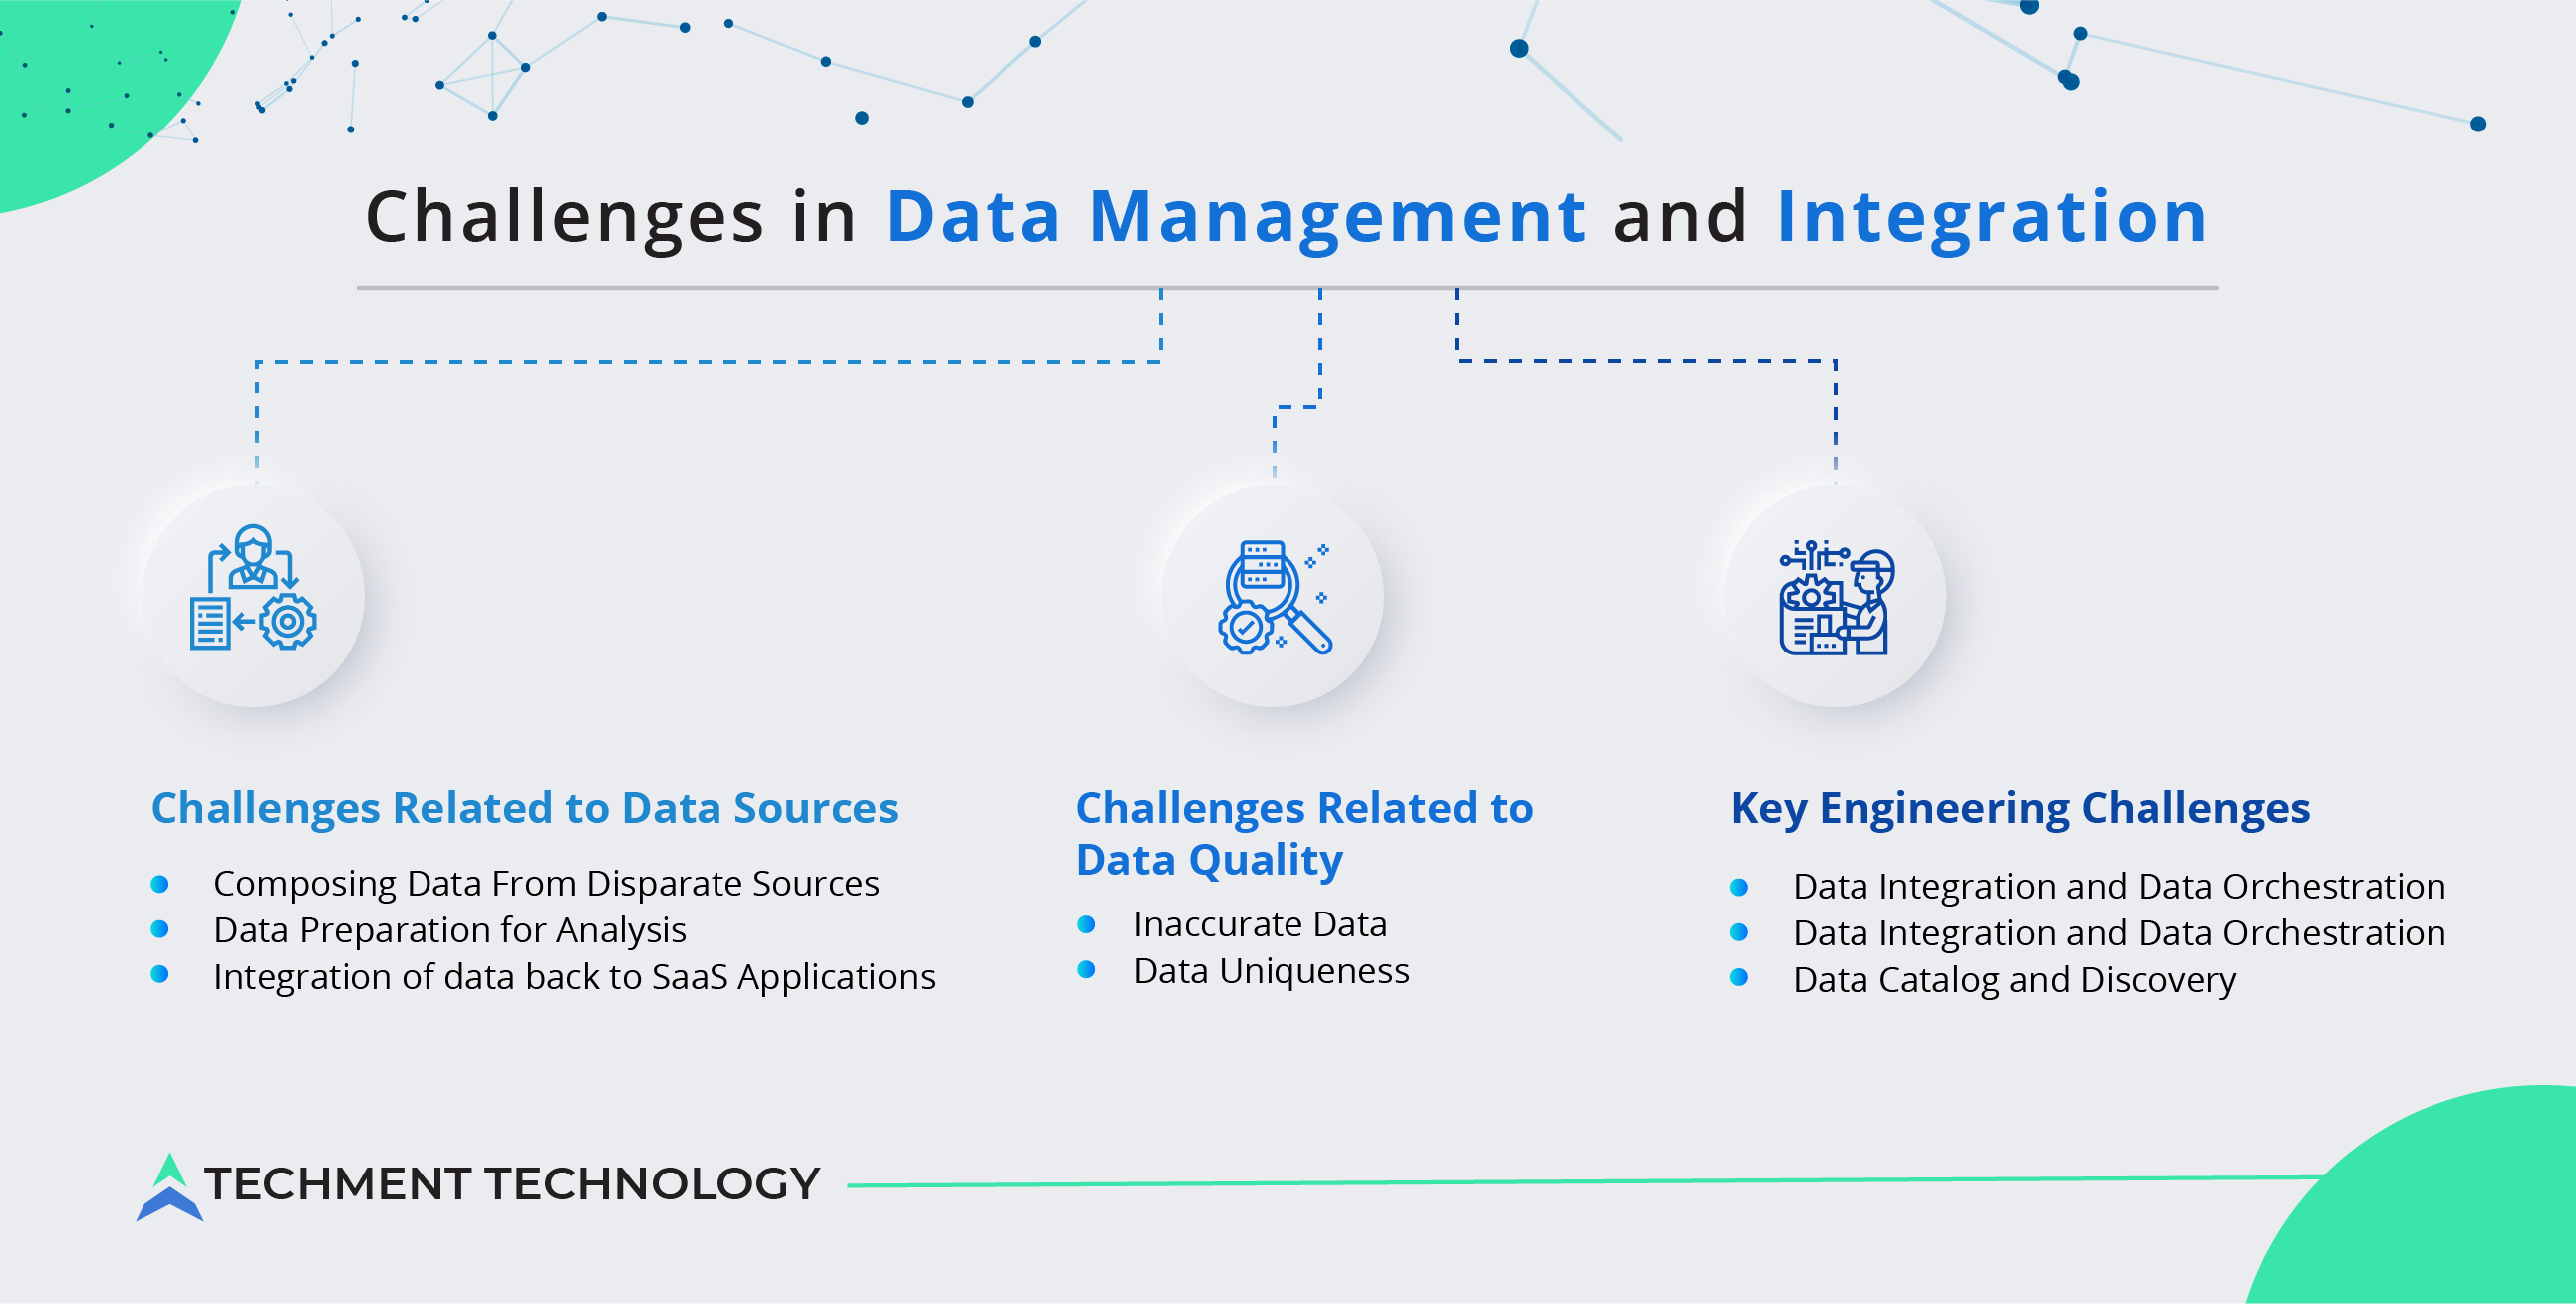 Challenges in Data Management and Integration